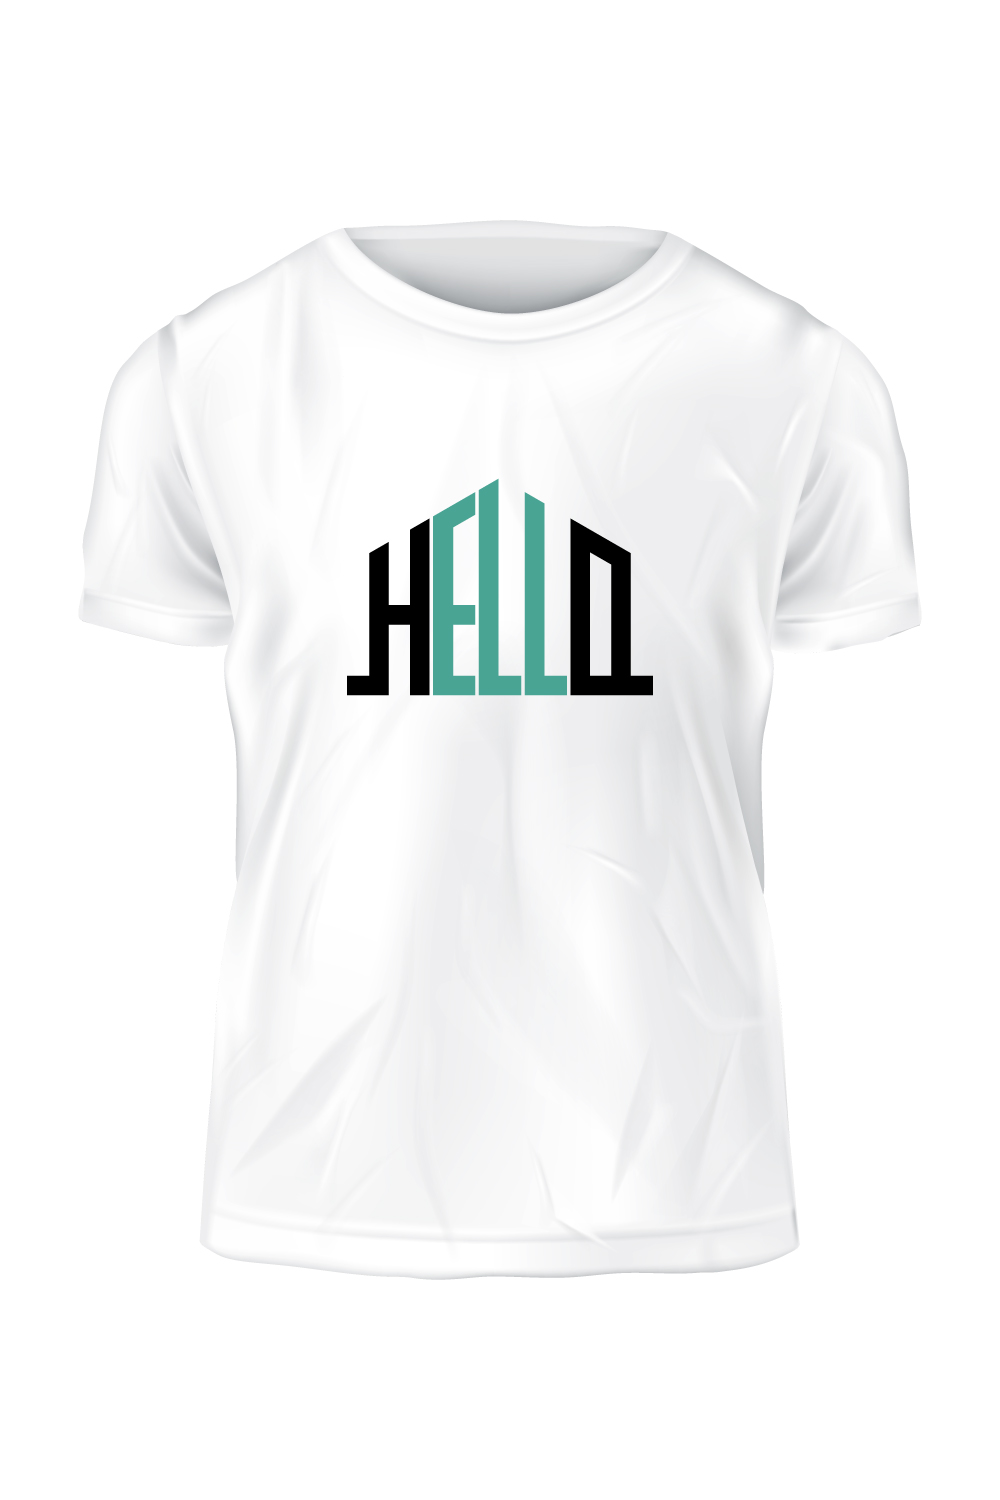 HELLO Logo and t-shirt design pinterest preview image.